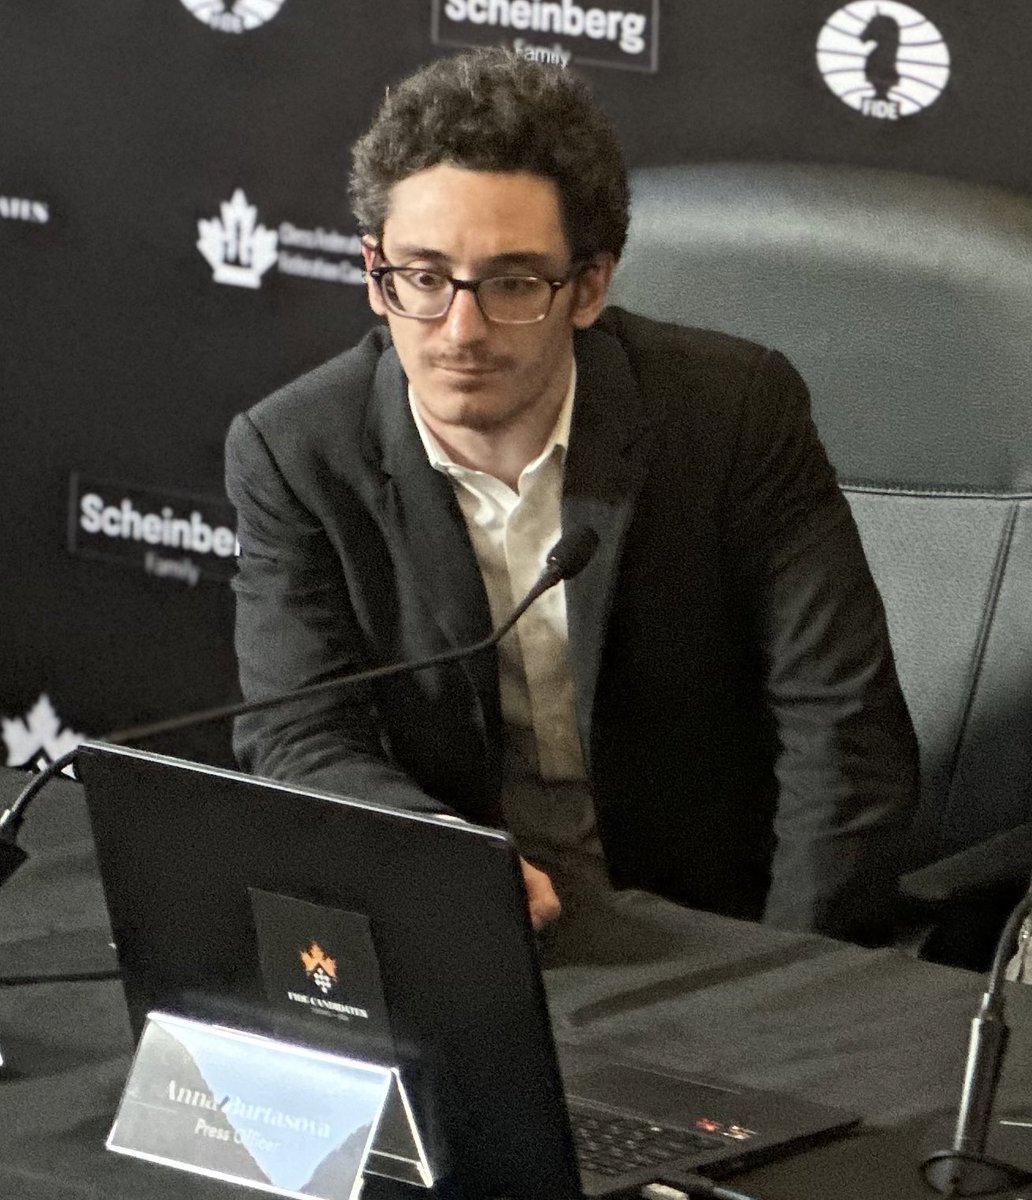 Fabiano Caruana took the mouse and started analyzing before the press conference started. Understandably, he is devastated.  #FIDECandidates